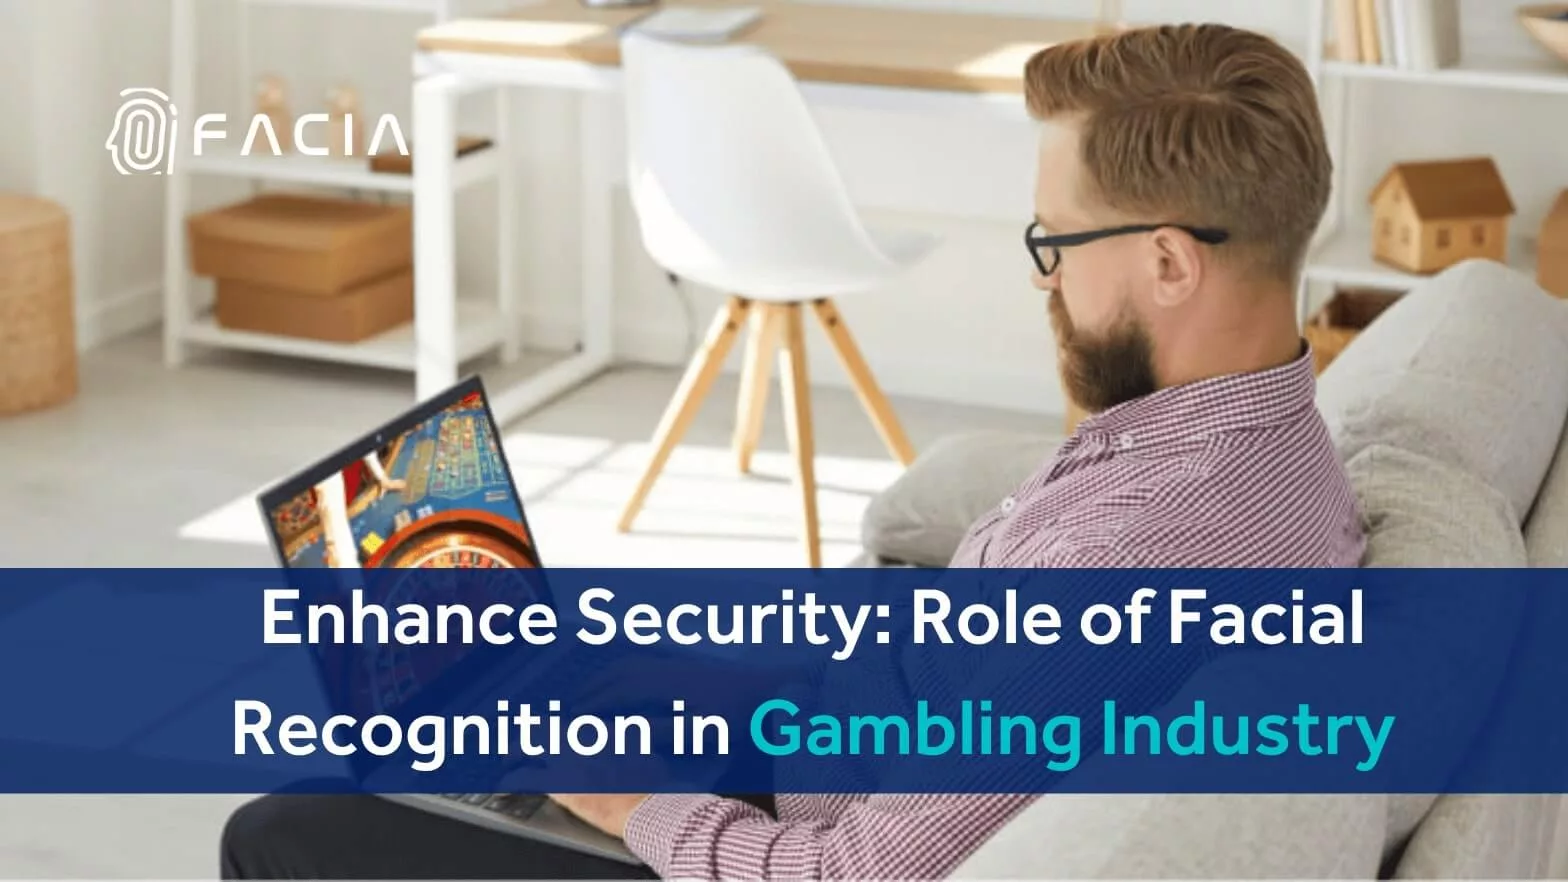 How Gambling Industry Is Leveraging Face Recognition Tech